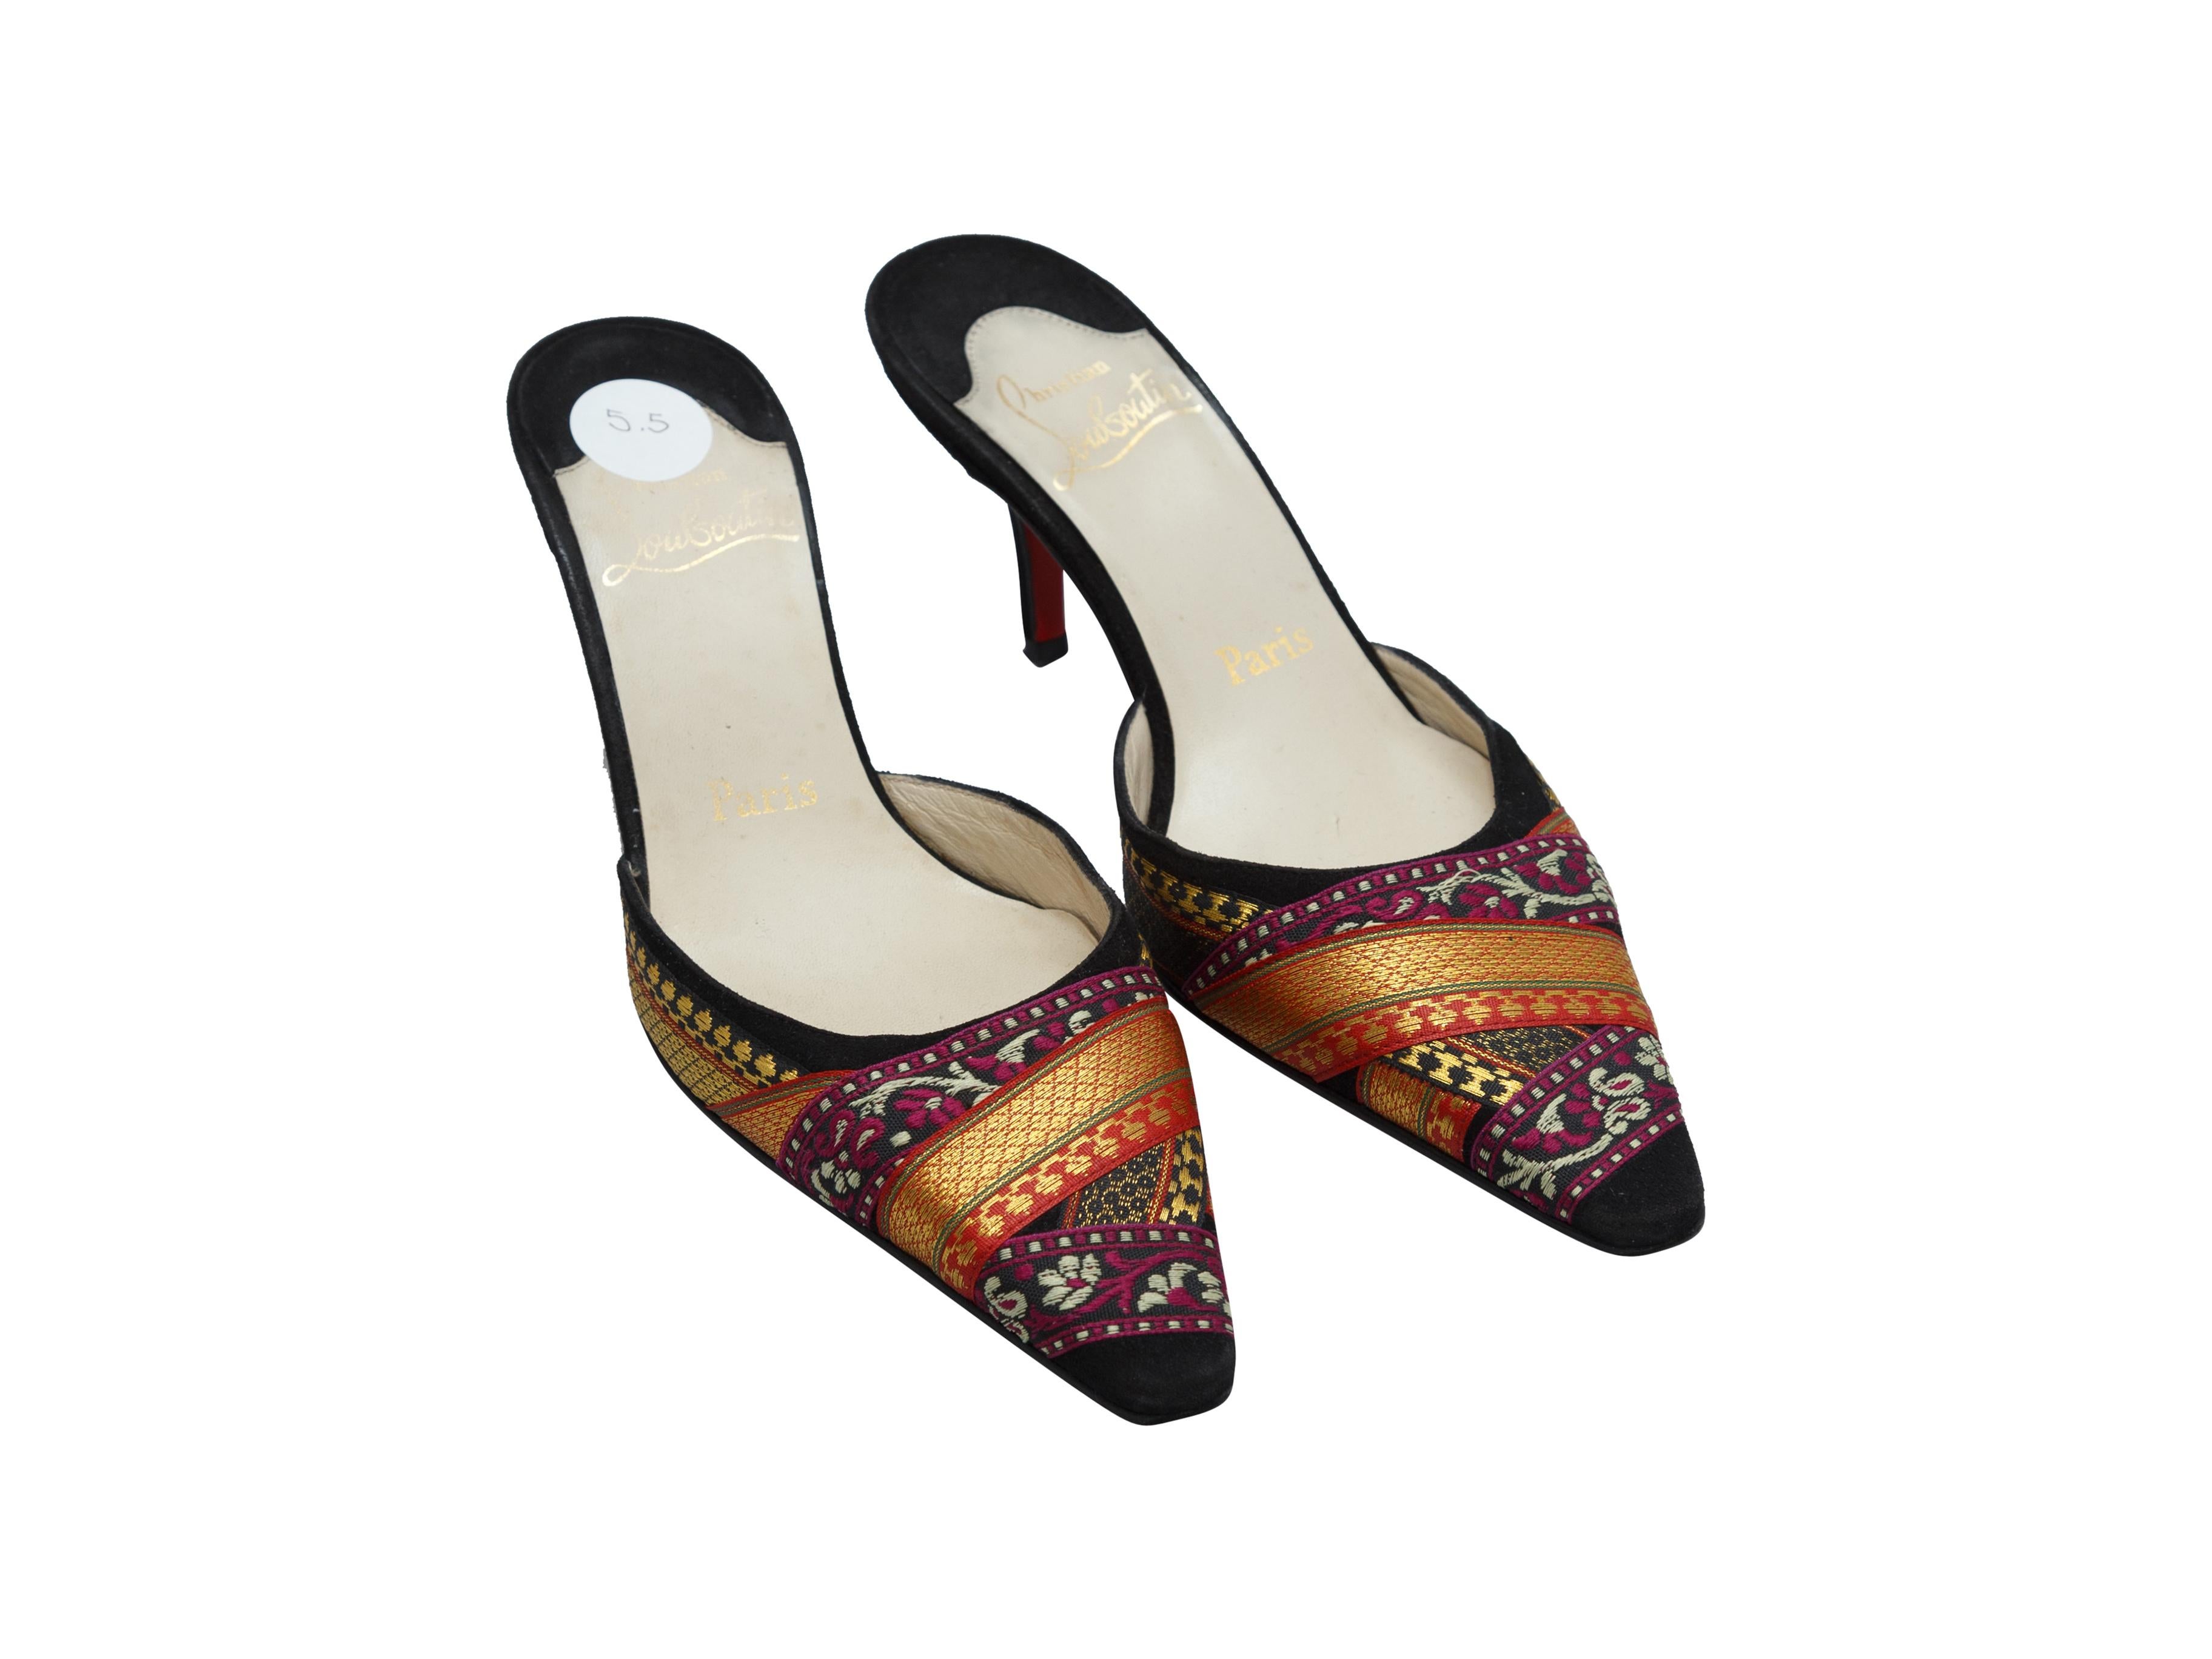 Product details: Black and multicolor brocade pointed-toe mules by Christian Louboutin. Designer size 35.5. 2.75